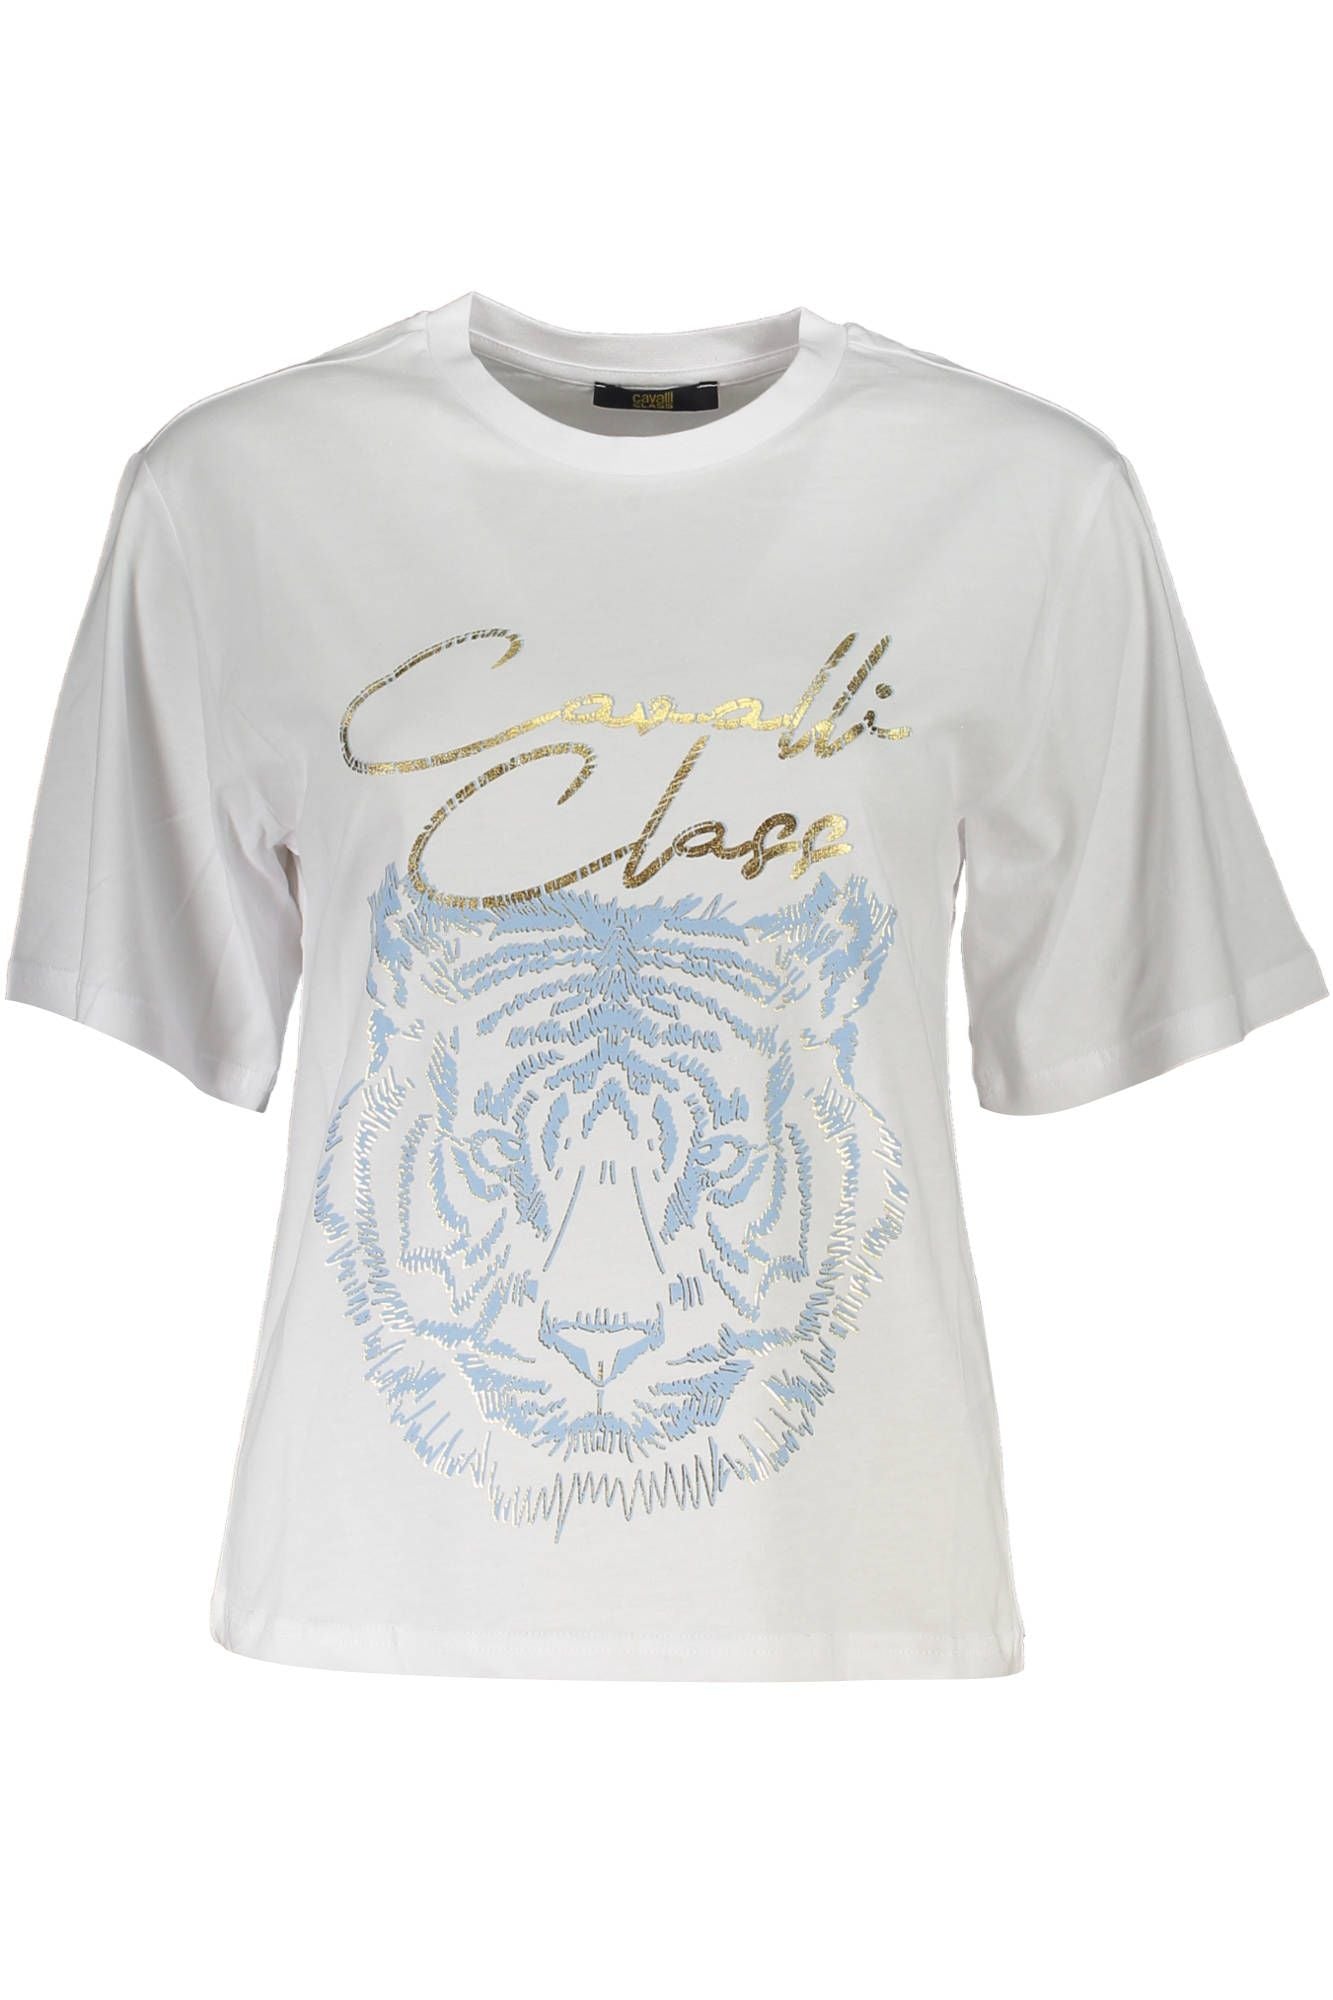 Cavalli Class Chic White Printed Tee with Timeless Elegance